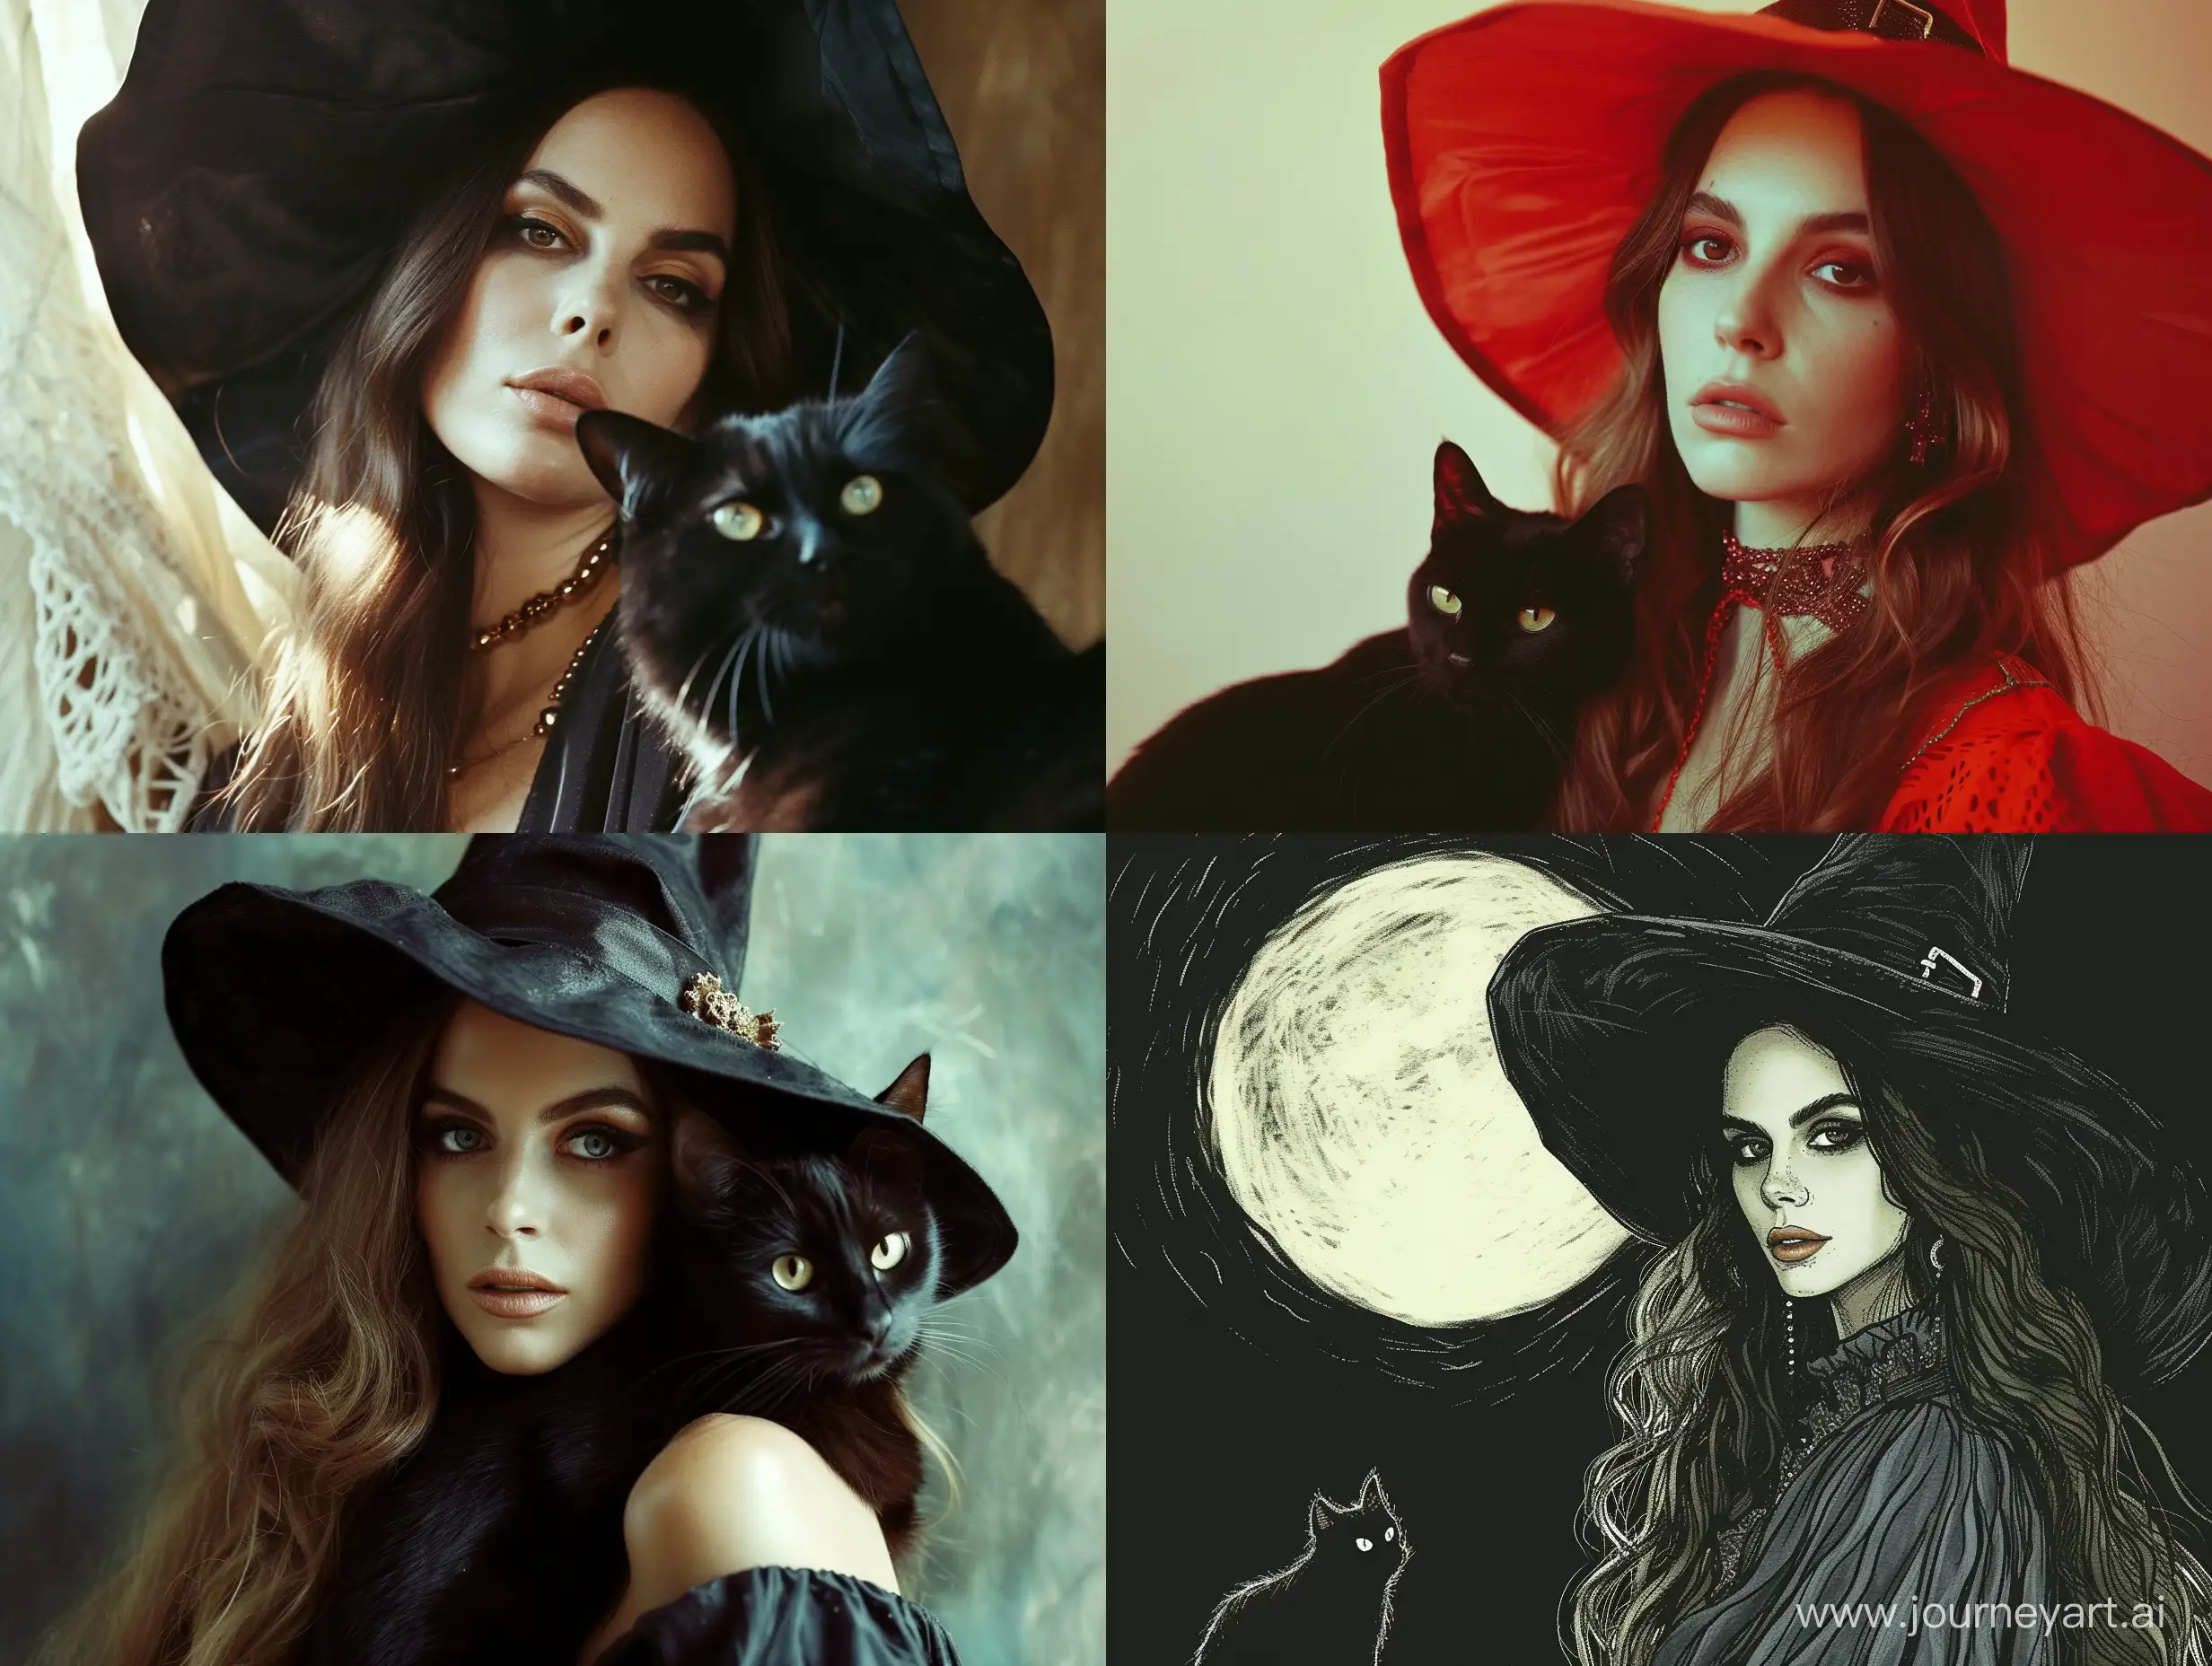 Lana-Del-Rey-Enchants-as-Witch-with-Black-Cat-Companion